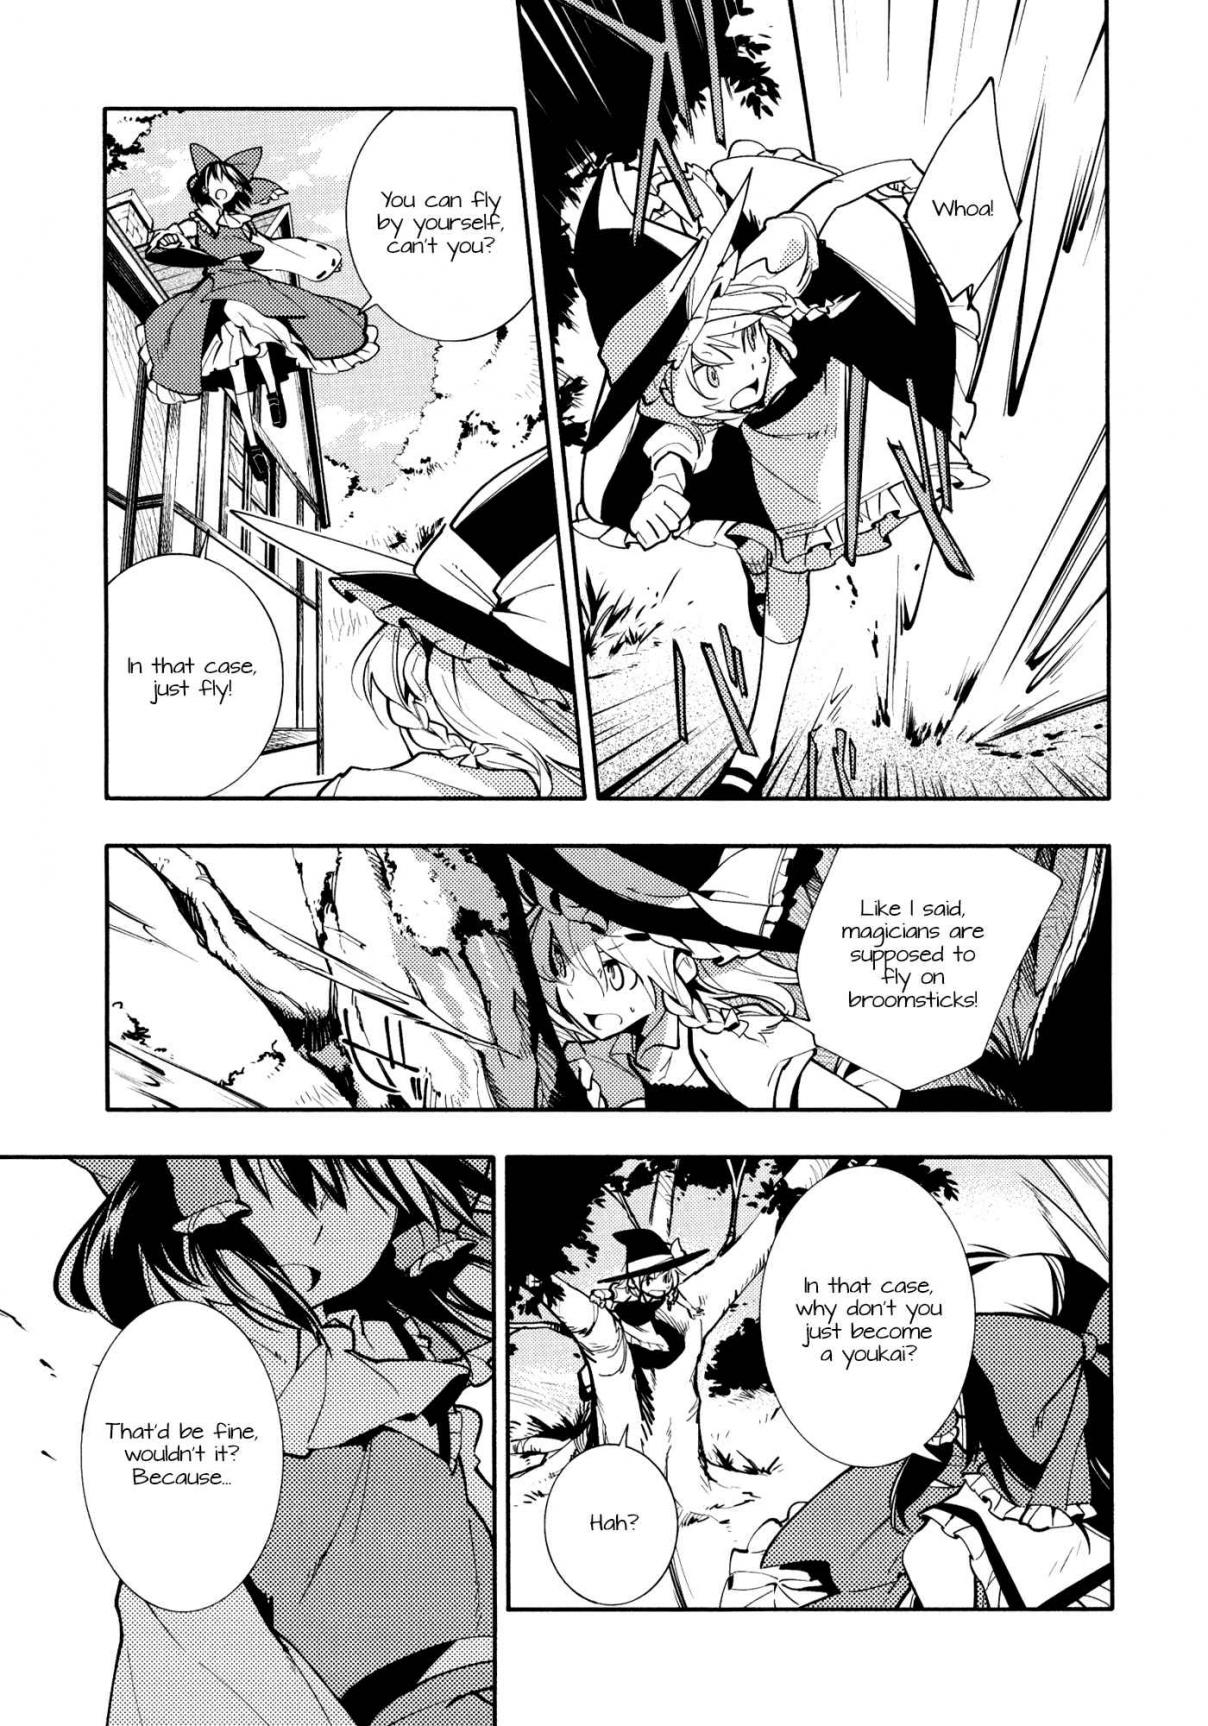 Touhou Project Relation Valley Anthology Vol. 1 (doujinshi) Vol. 1 Ch. 9 Relation Valley Part 2 + postscript